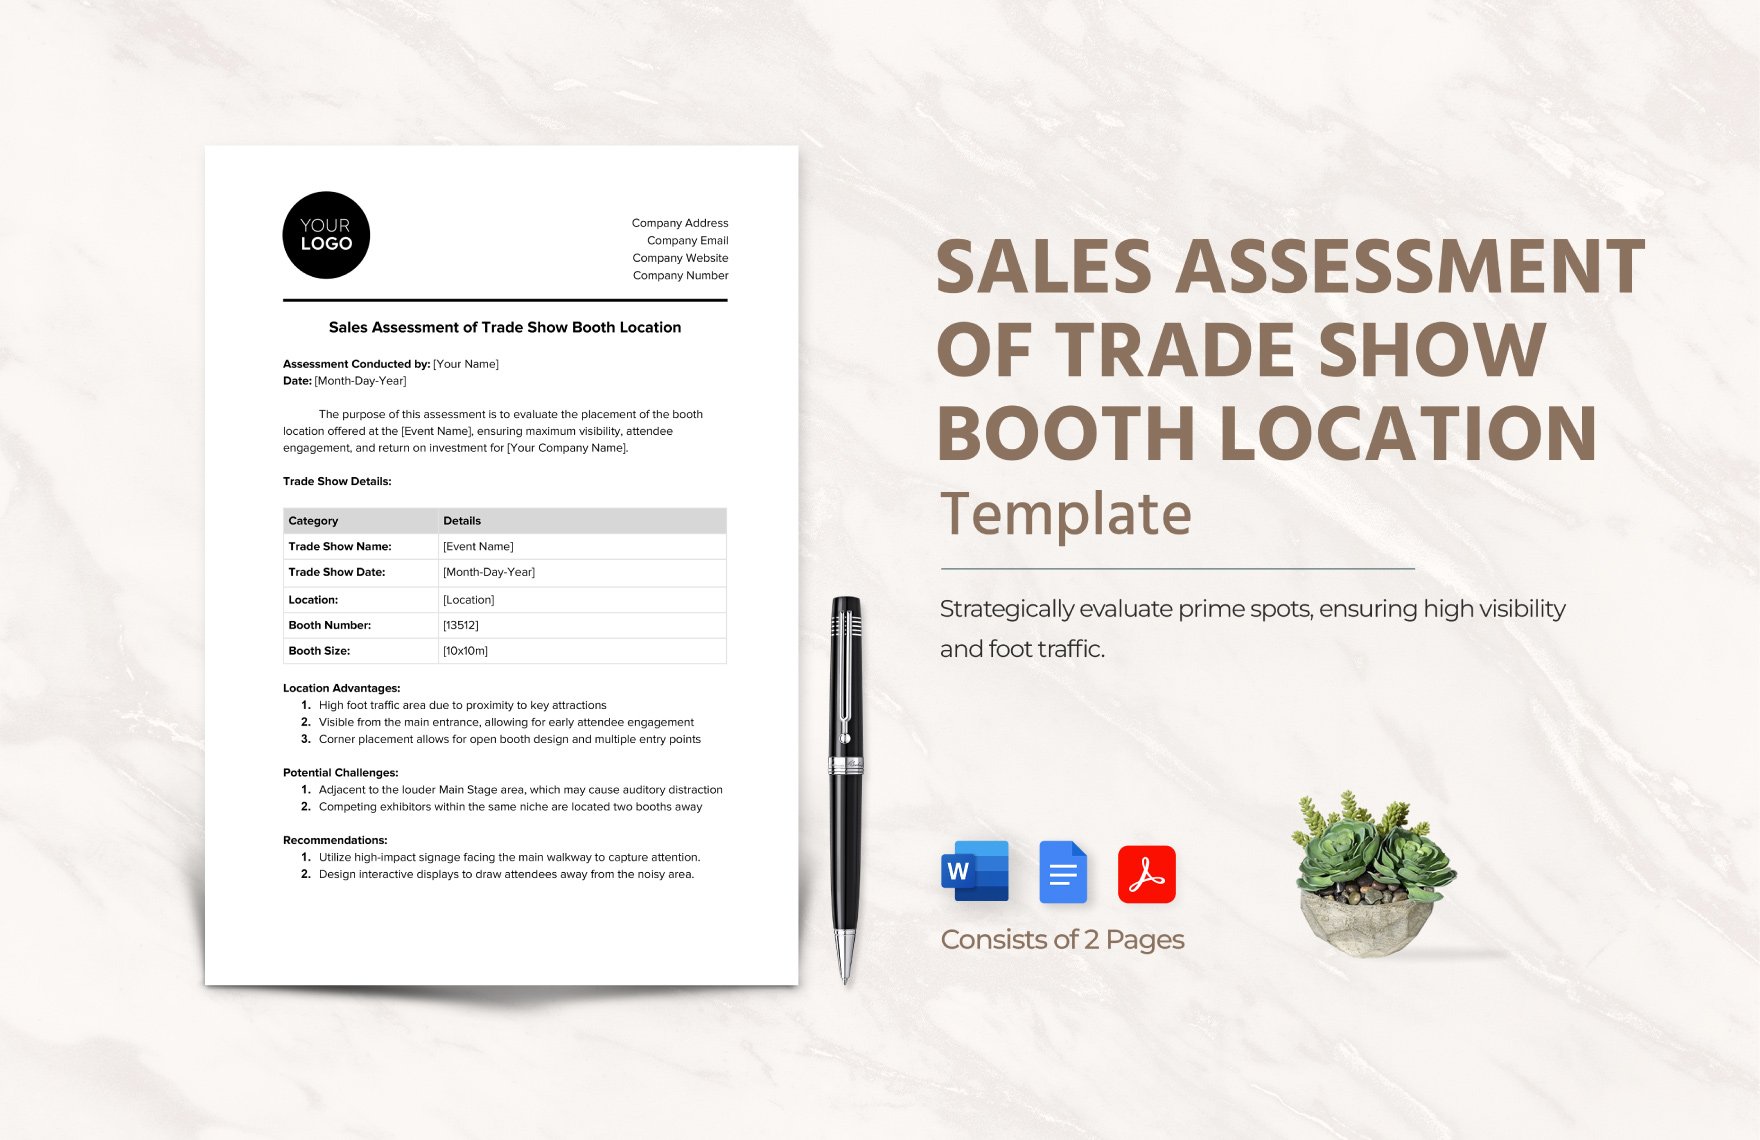 Sales Assessment of Trade Show Booth Location Template